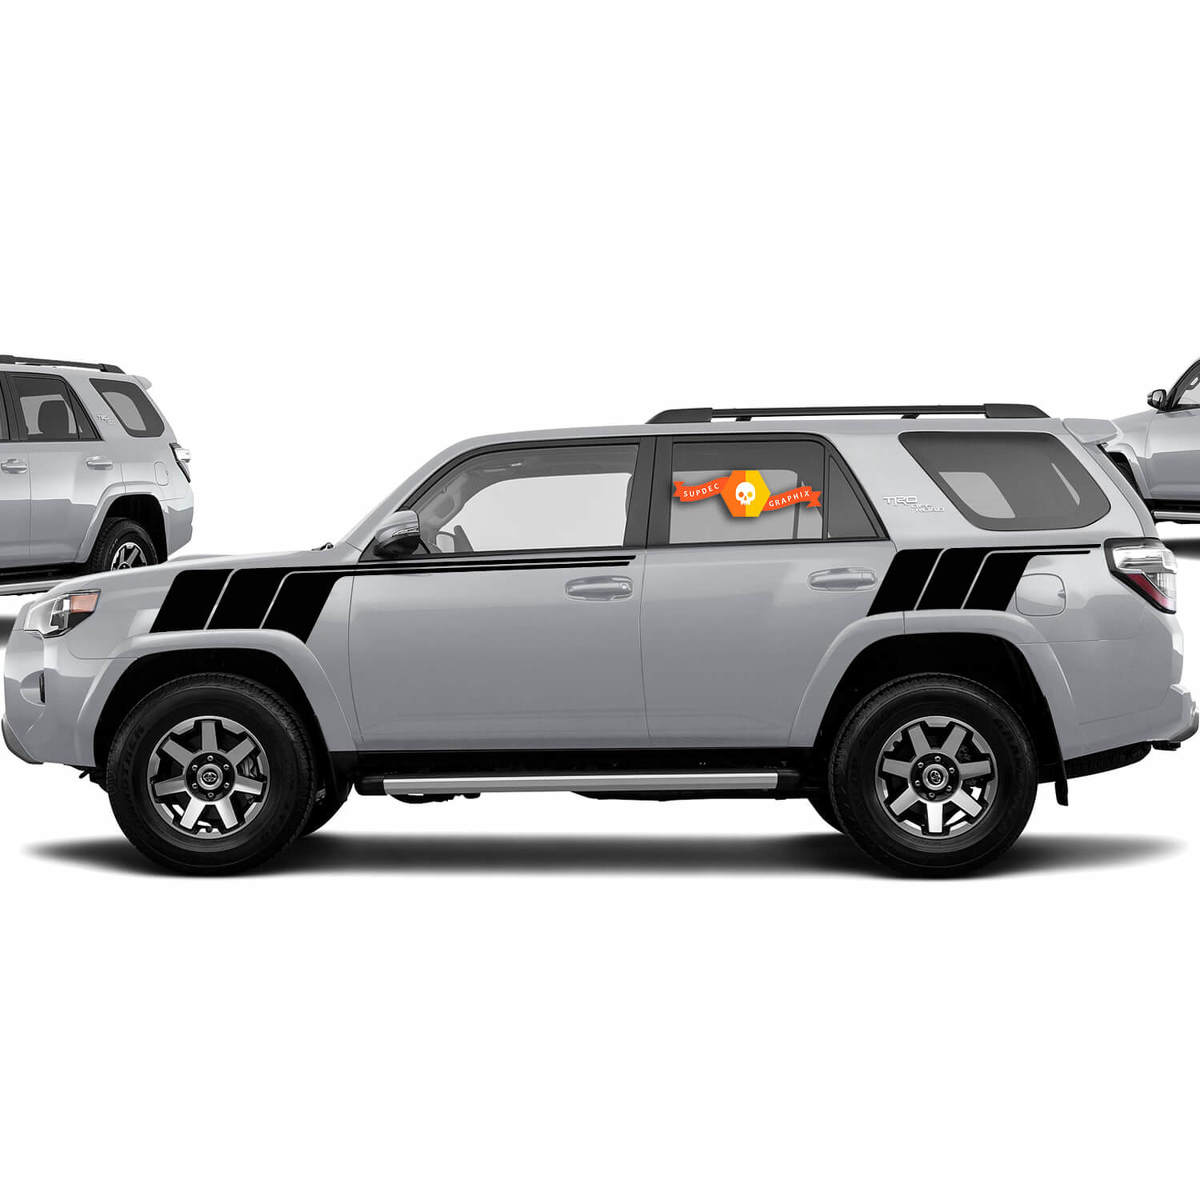 Kits of Toyota 4runner TRD Back To The Future all black retro vintage stripe kit Sport 4x4 Off Road PRO  decal
